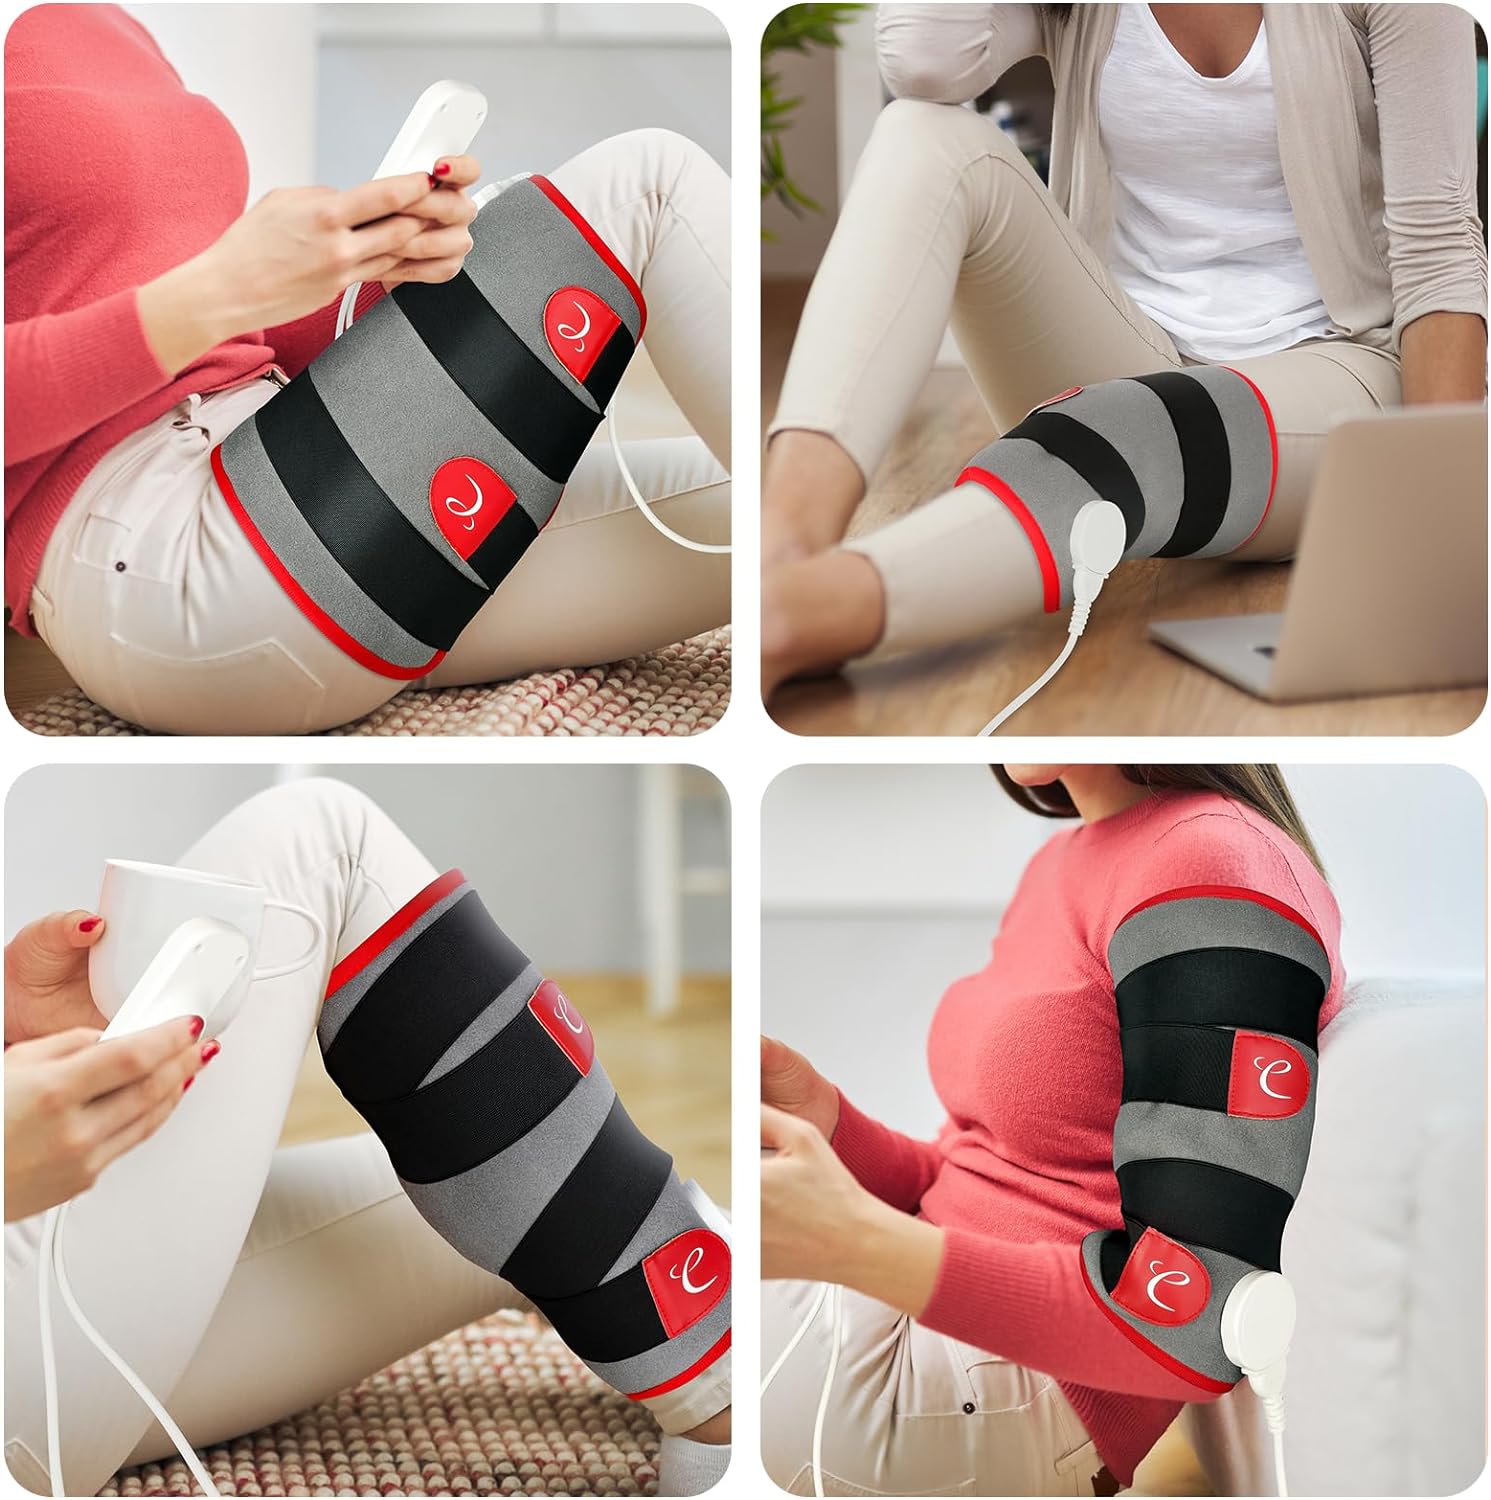 Comfytemp Leg Heating Pad for Pain Relief